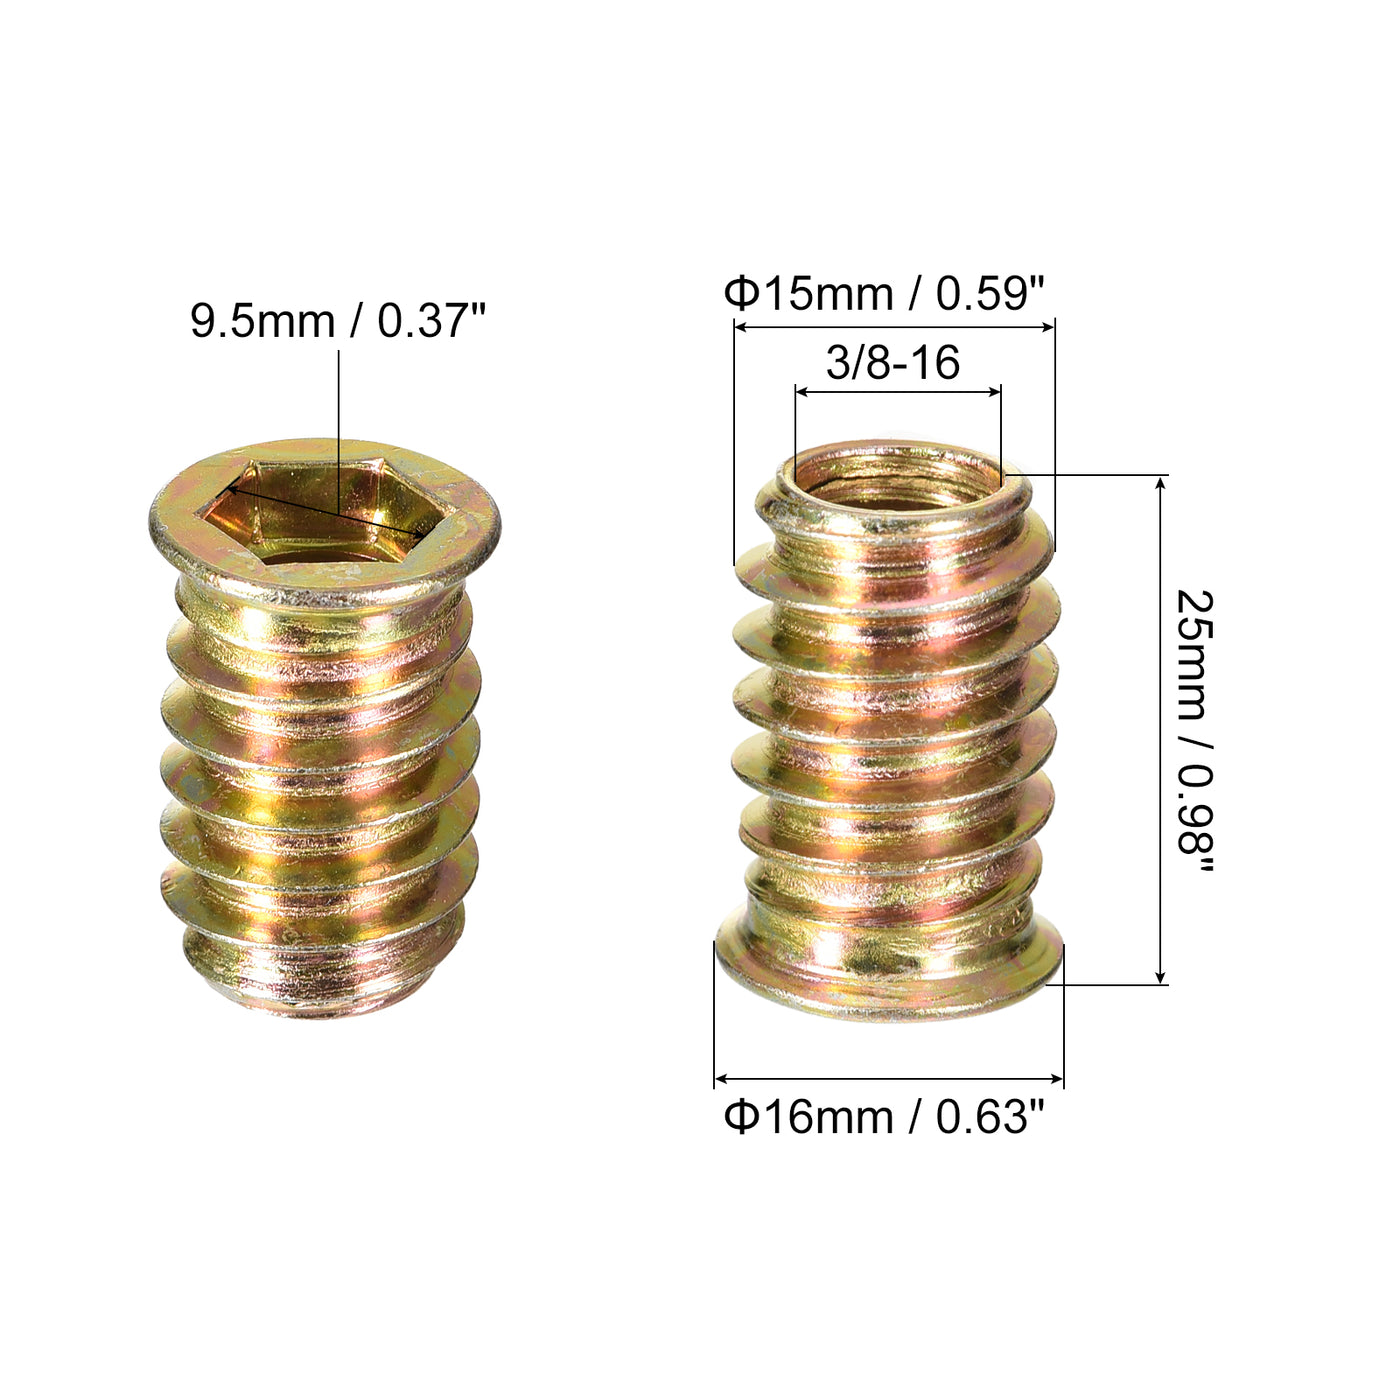 uxcell Uxcell Threaded Inserts Nuts, Threaded Inserts for Wood Furniture, Hex Socket Drive Wood Insert Nuts with Hex Wrench